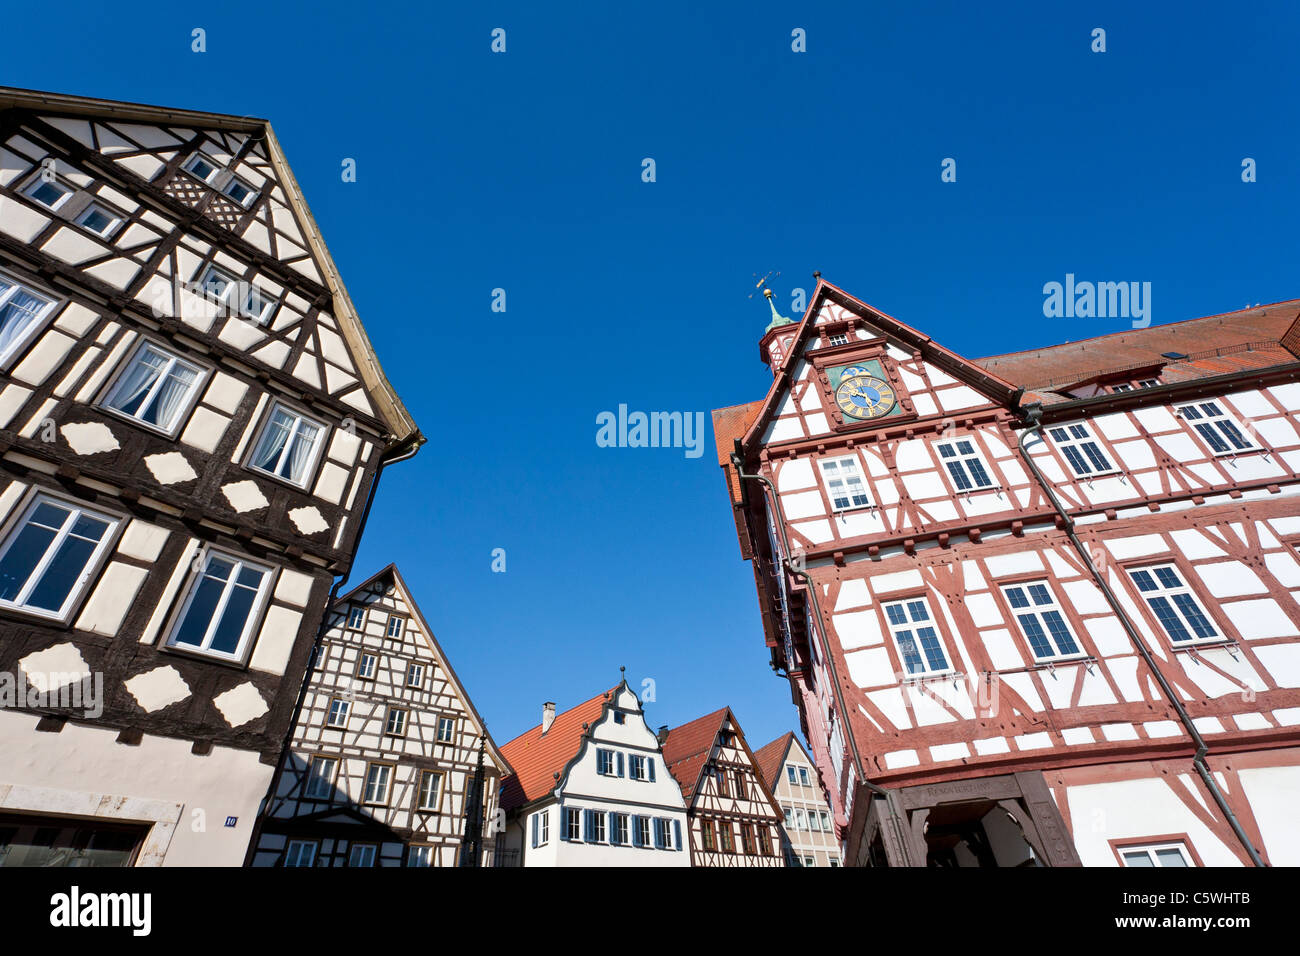 Germany, Baden-WÃ¼rttemberg, Bad Urach, View of frame houses and town hall Stock Photo